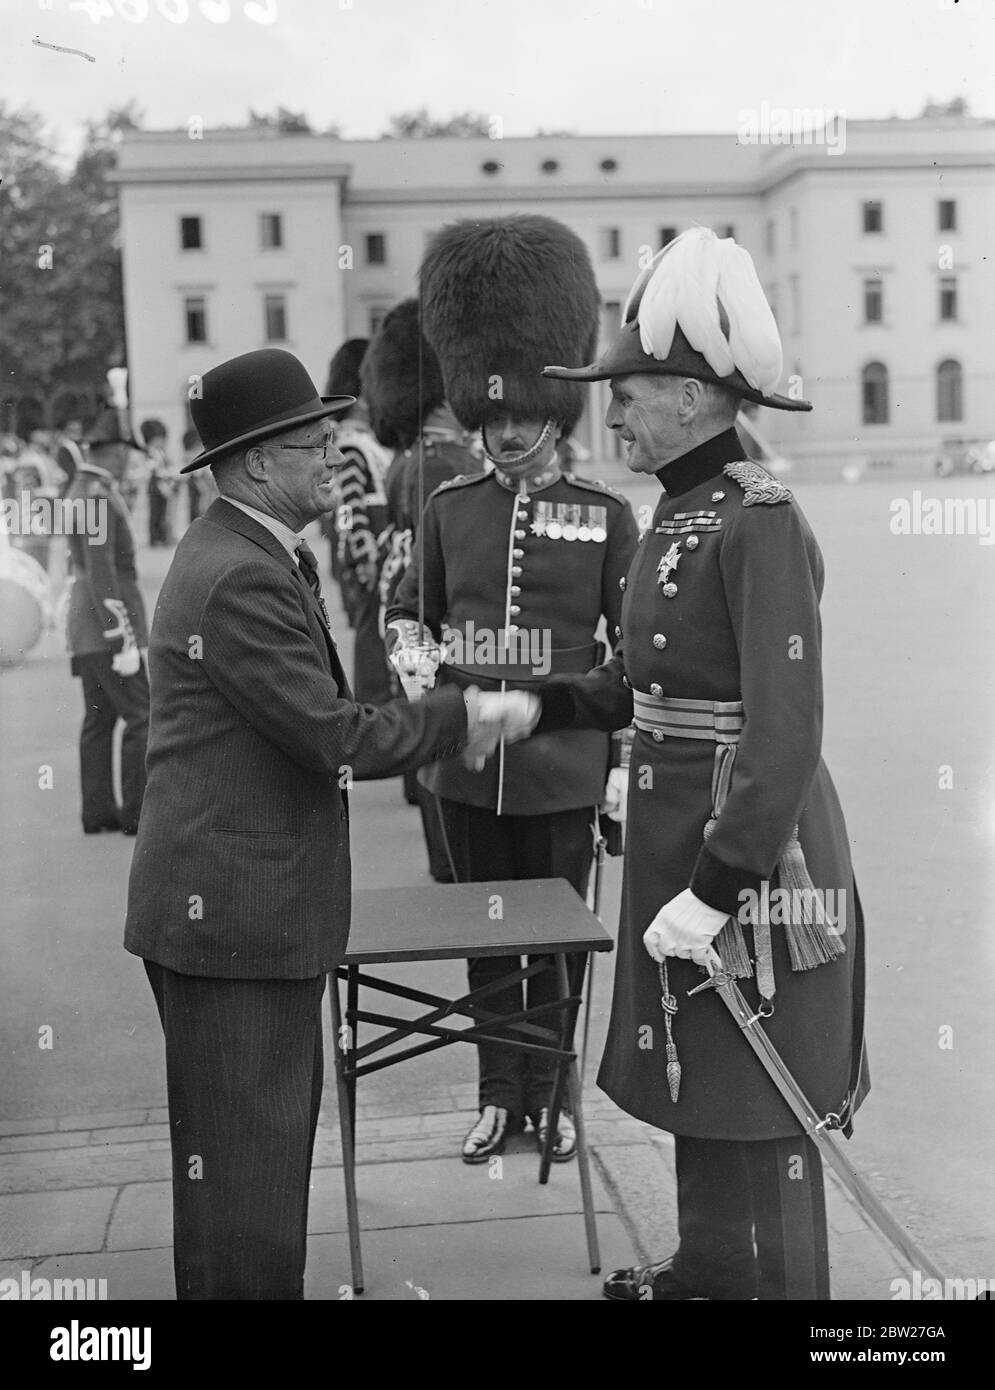 26 years after being recommended for the Meritorious Service Medal, Mr J. Brady received the decoration from Major General B. N. Sergison-Brooke, General Officer Commanding, London District, at Wellington Barracks. When recommended for the medal, Mr Bradey was Acting-Sergeant Major of the Eastern Bengal State Railway Volunteer Rifles, and the Prince of Wales Volunteers (South Lancashire Regiment). Mr Bradley forgot all about the award until he received a letter from the War Office recently. Major General B. N. Sergison-Brooke shaking hands with J Brady at Wellington Barracks. 29 June 1937 Stock Photo